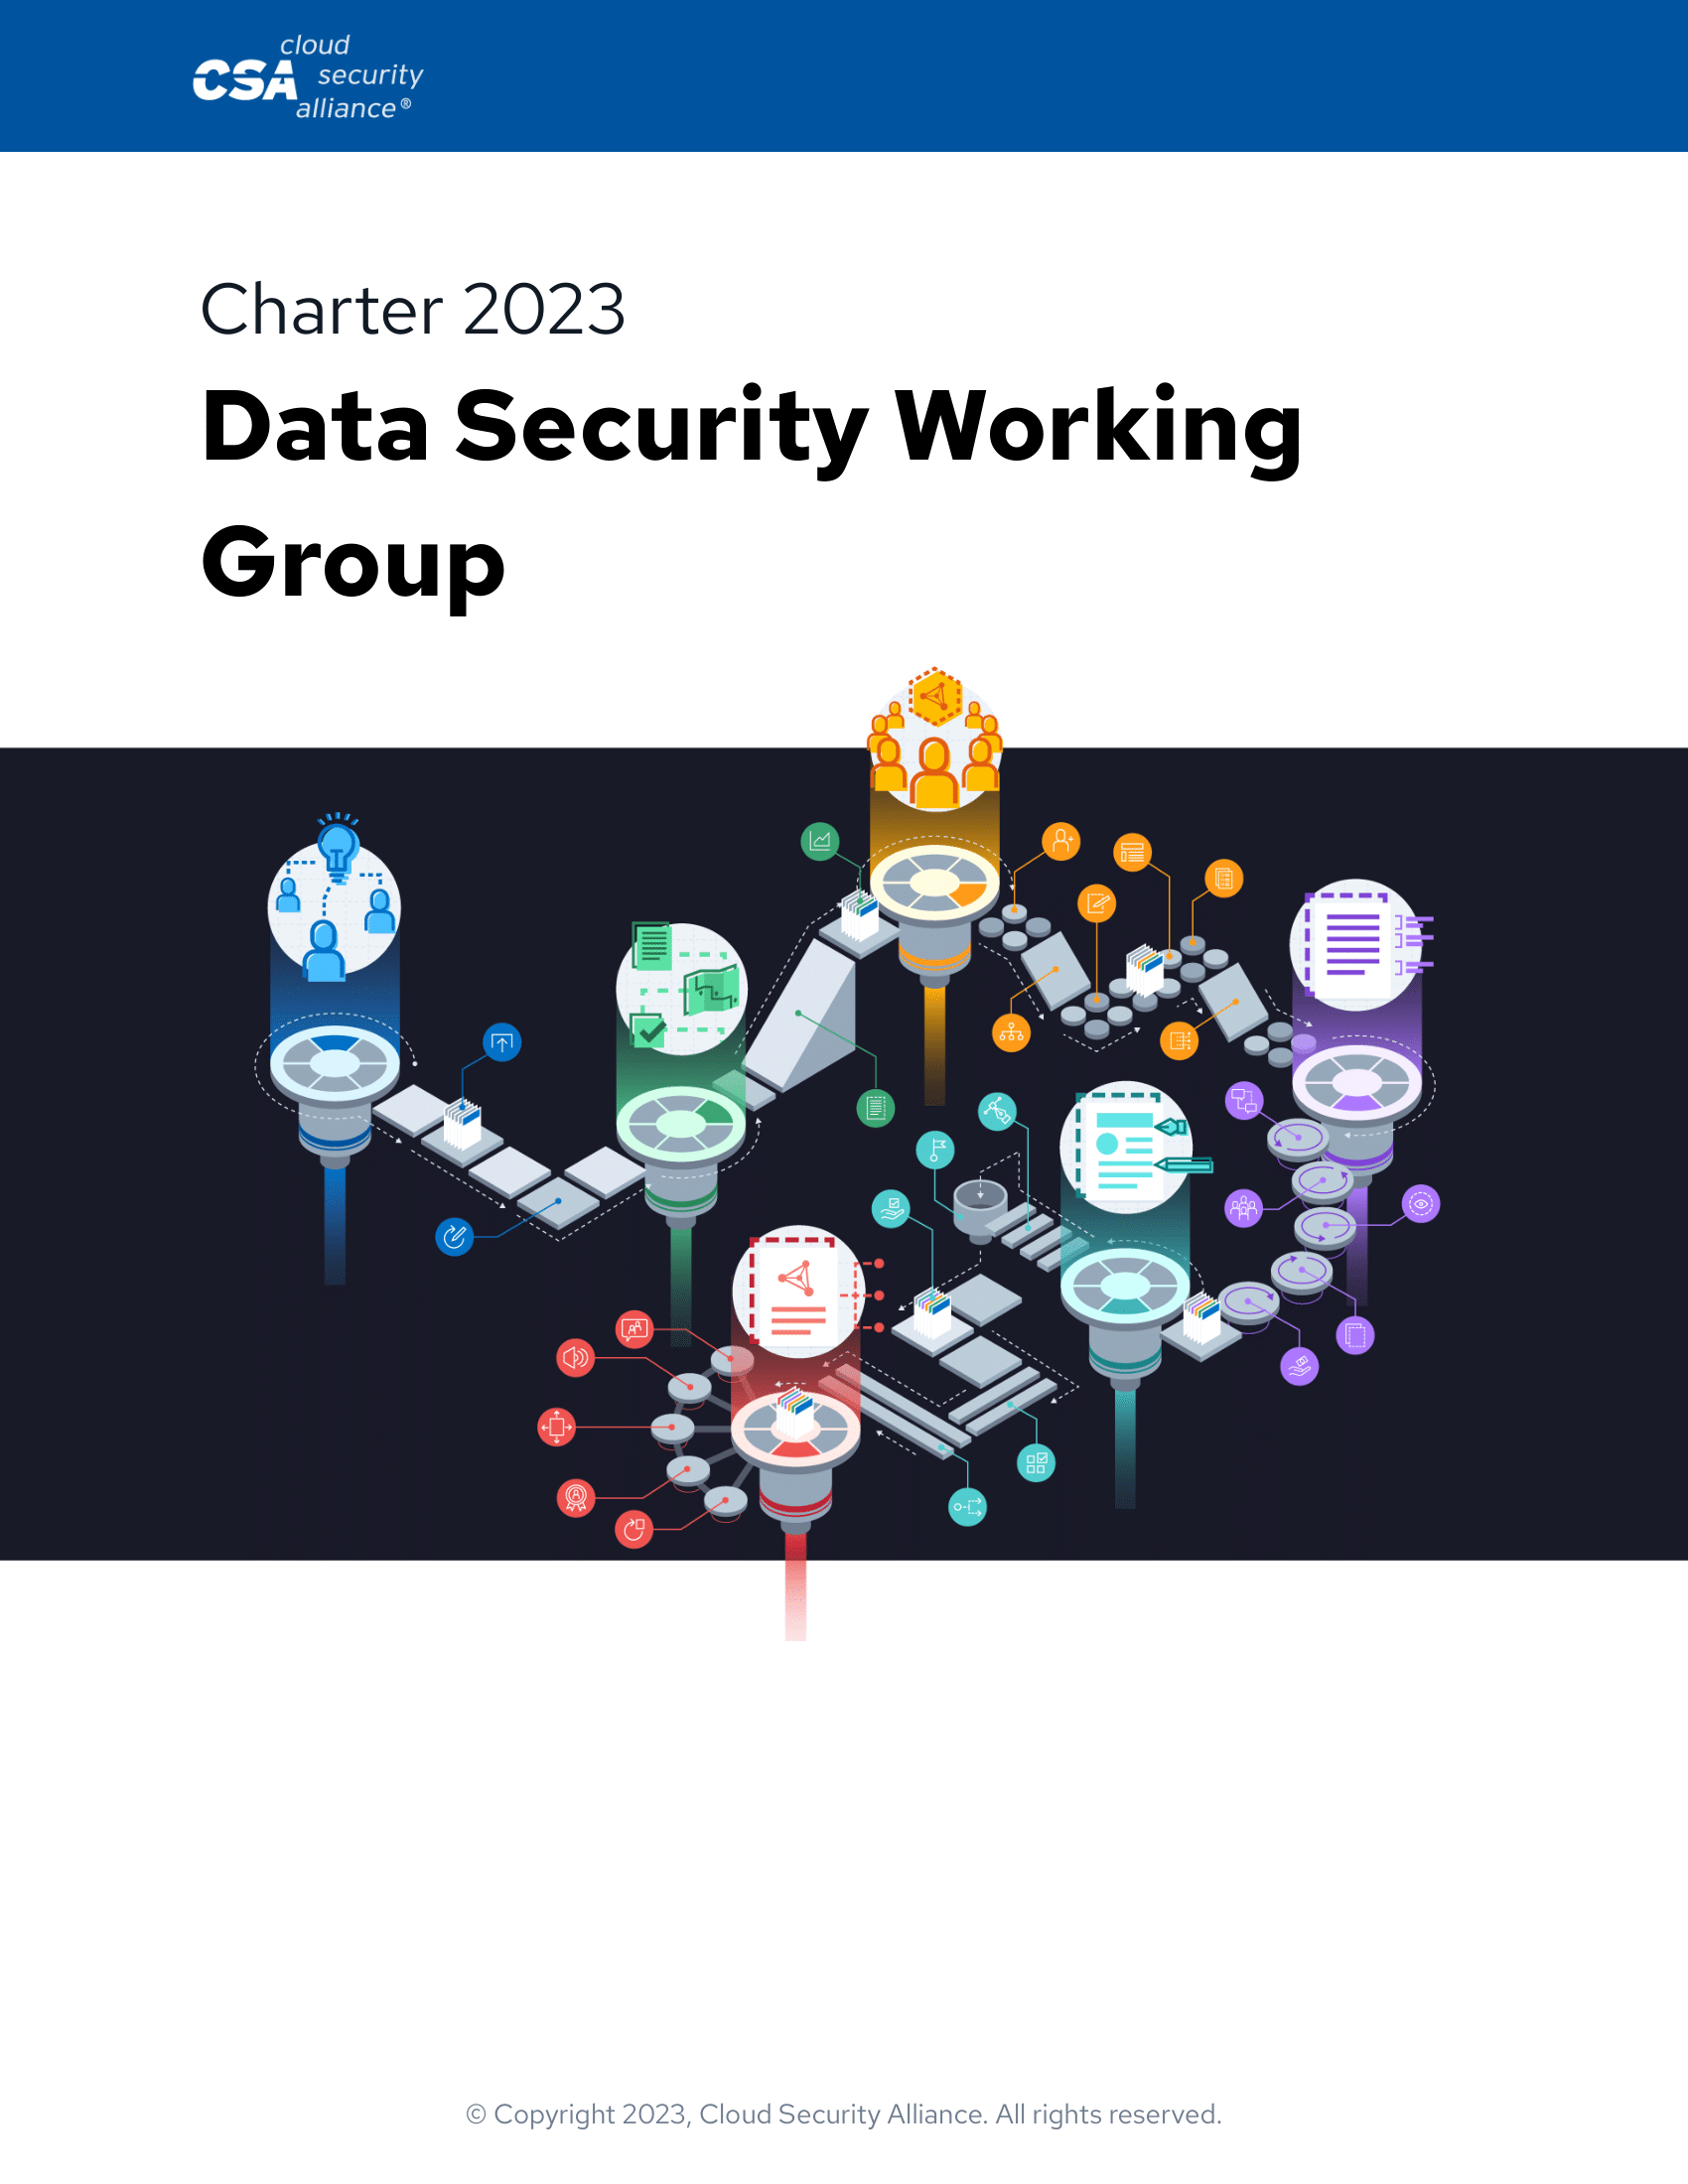 Data Security Working Group Charter 2023